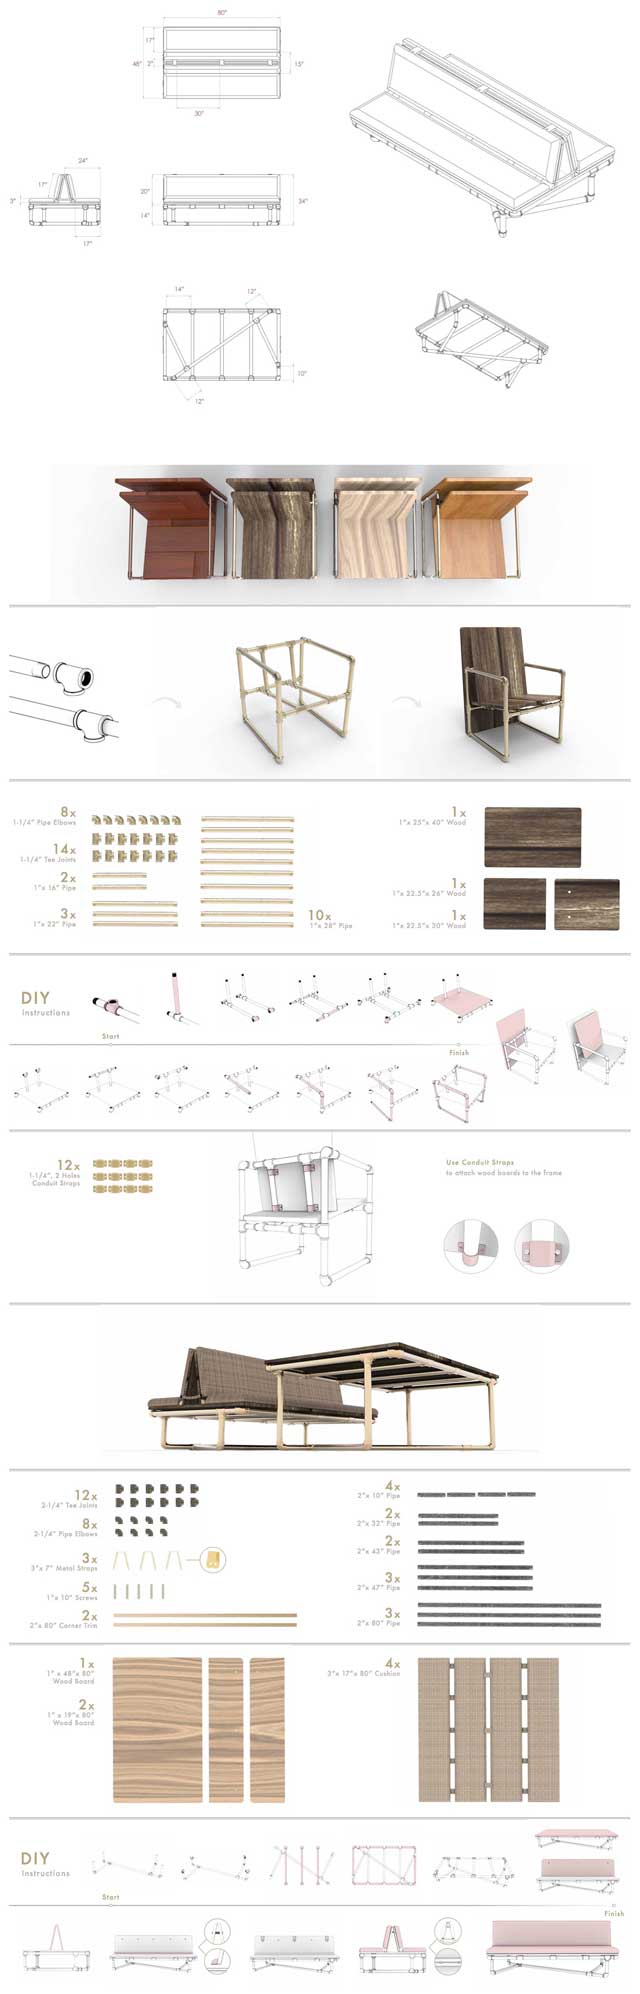 Iris Hsu (Industrial Designer), put the final touches on the Pipe Couch and Table/Chair designs for the Duplicable City Center library by creating these final measurement documents for the couch and then detailed assembly instructions for both the couch and table/chair including a final render, parts list, and step-by-step instructions for putting them both together. Fantastic work by Iris Hsu!